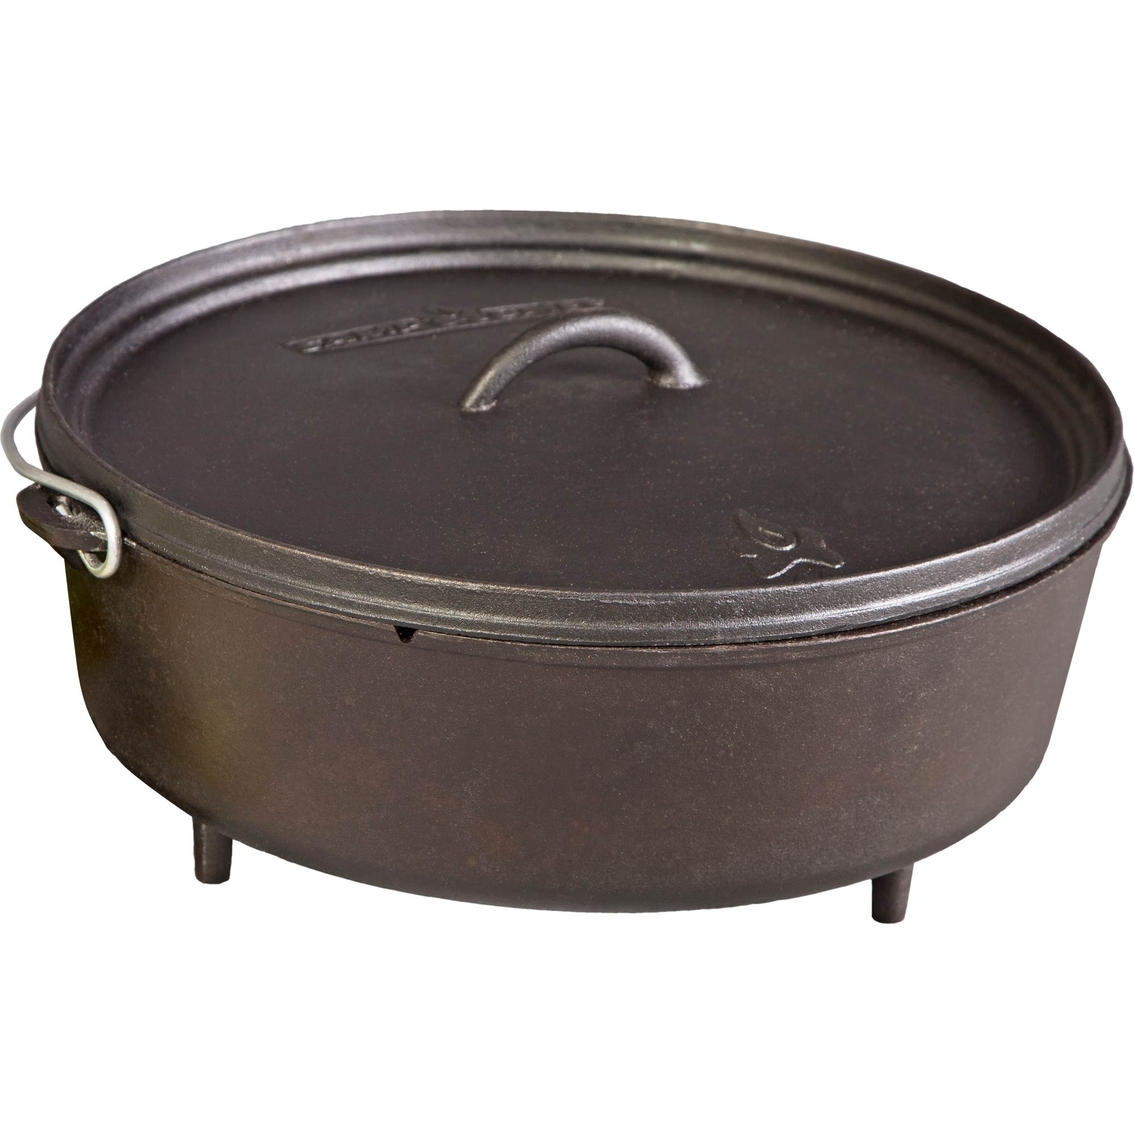 Camp Chef 14 in. Cast Iron Classic Dutch Oven - Image 1 of 4